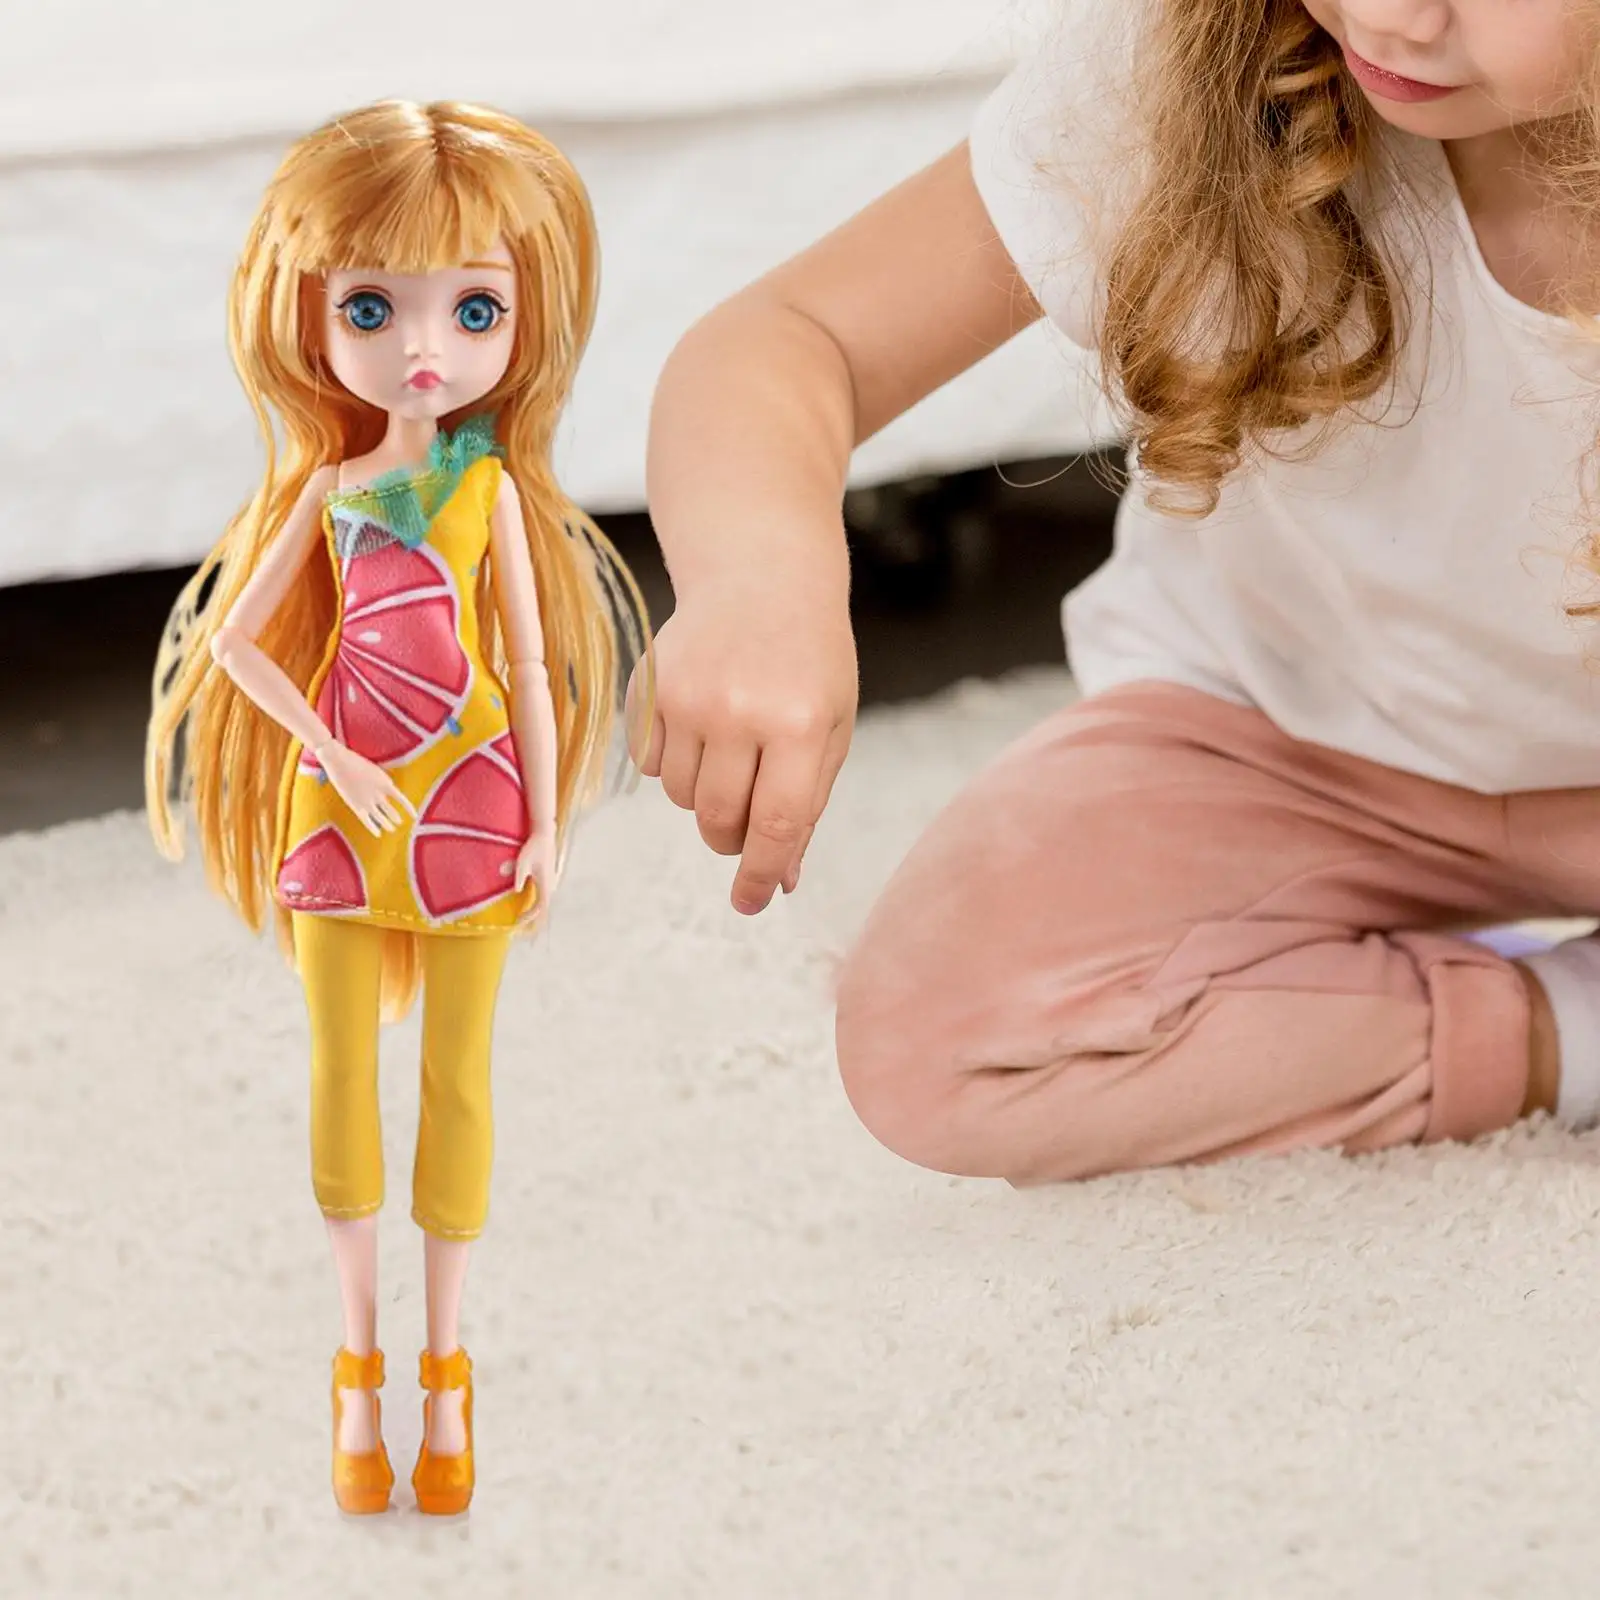 30cm Fashion Doll with Clothes and Shoes Moveable Joints 9 Flexible Joints 3D Eyes Lovely Dress up for 3 4 Girls 6 7 8 Gifts